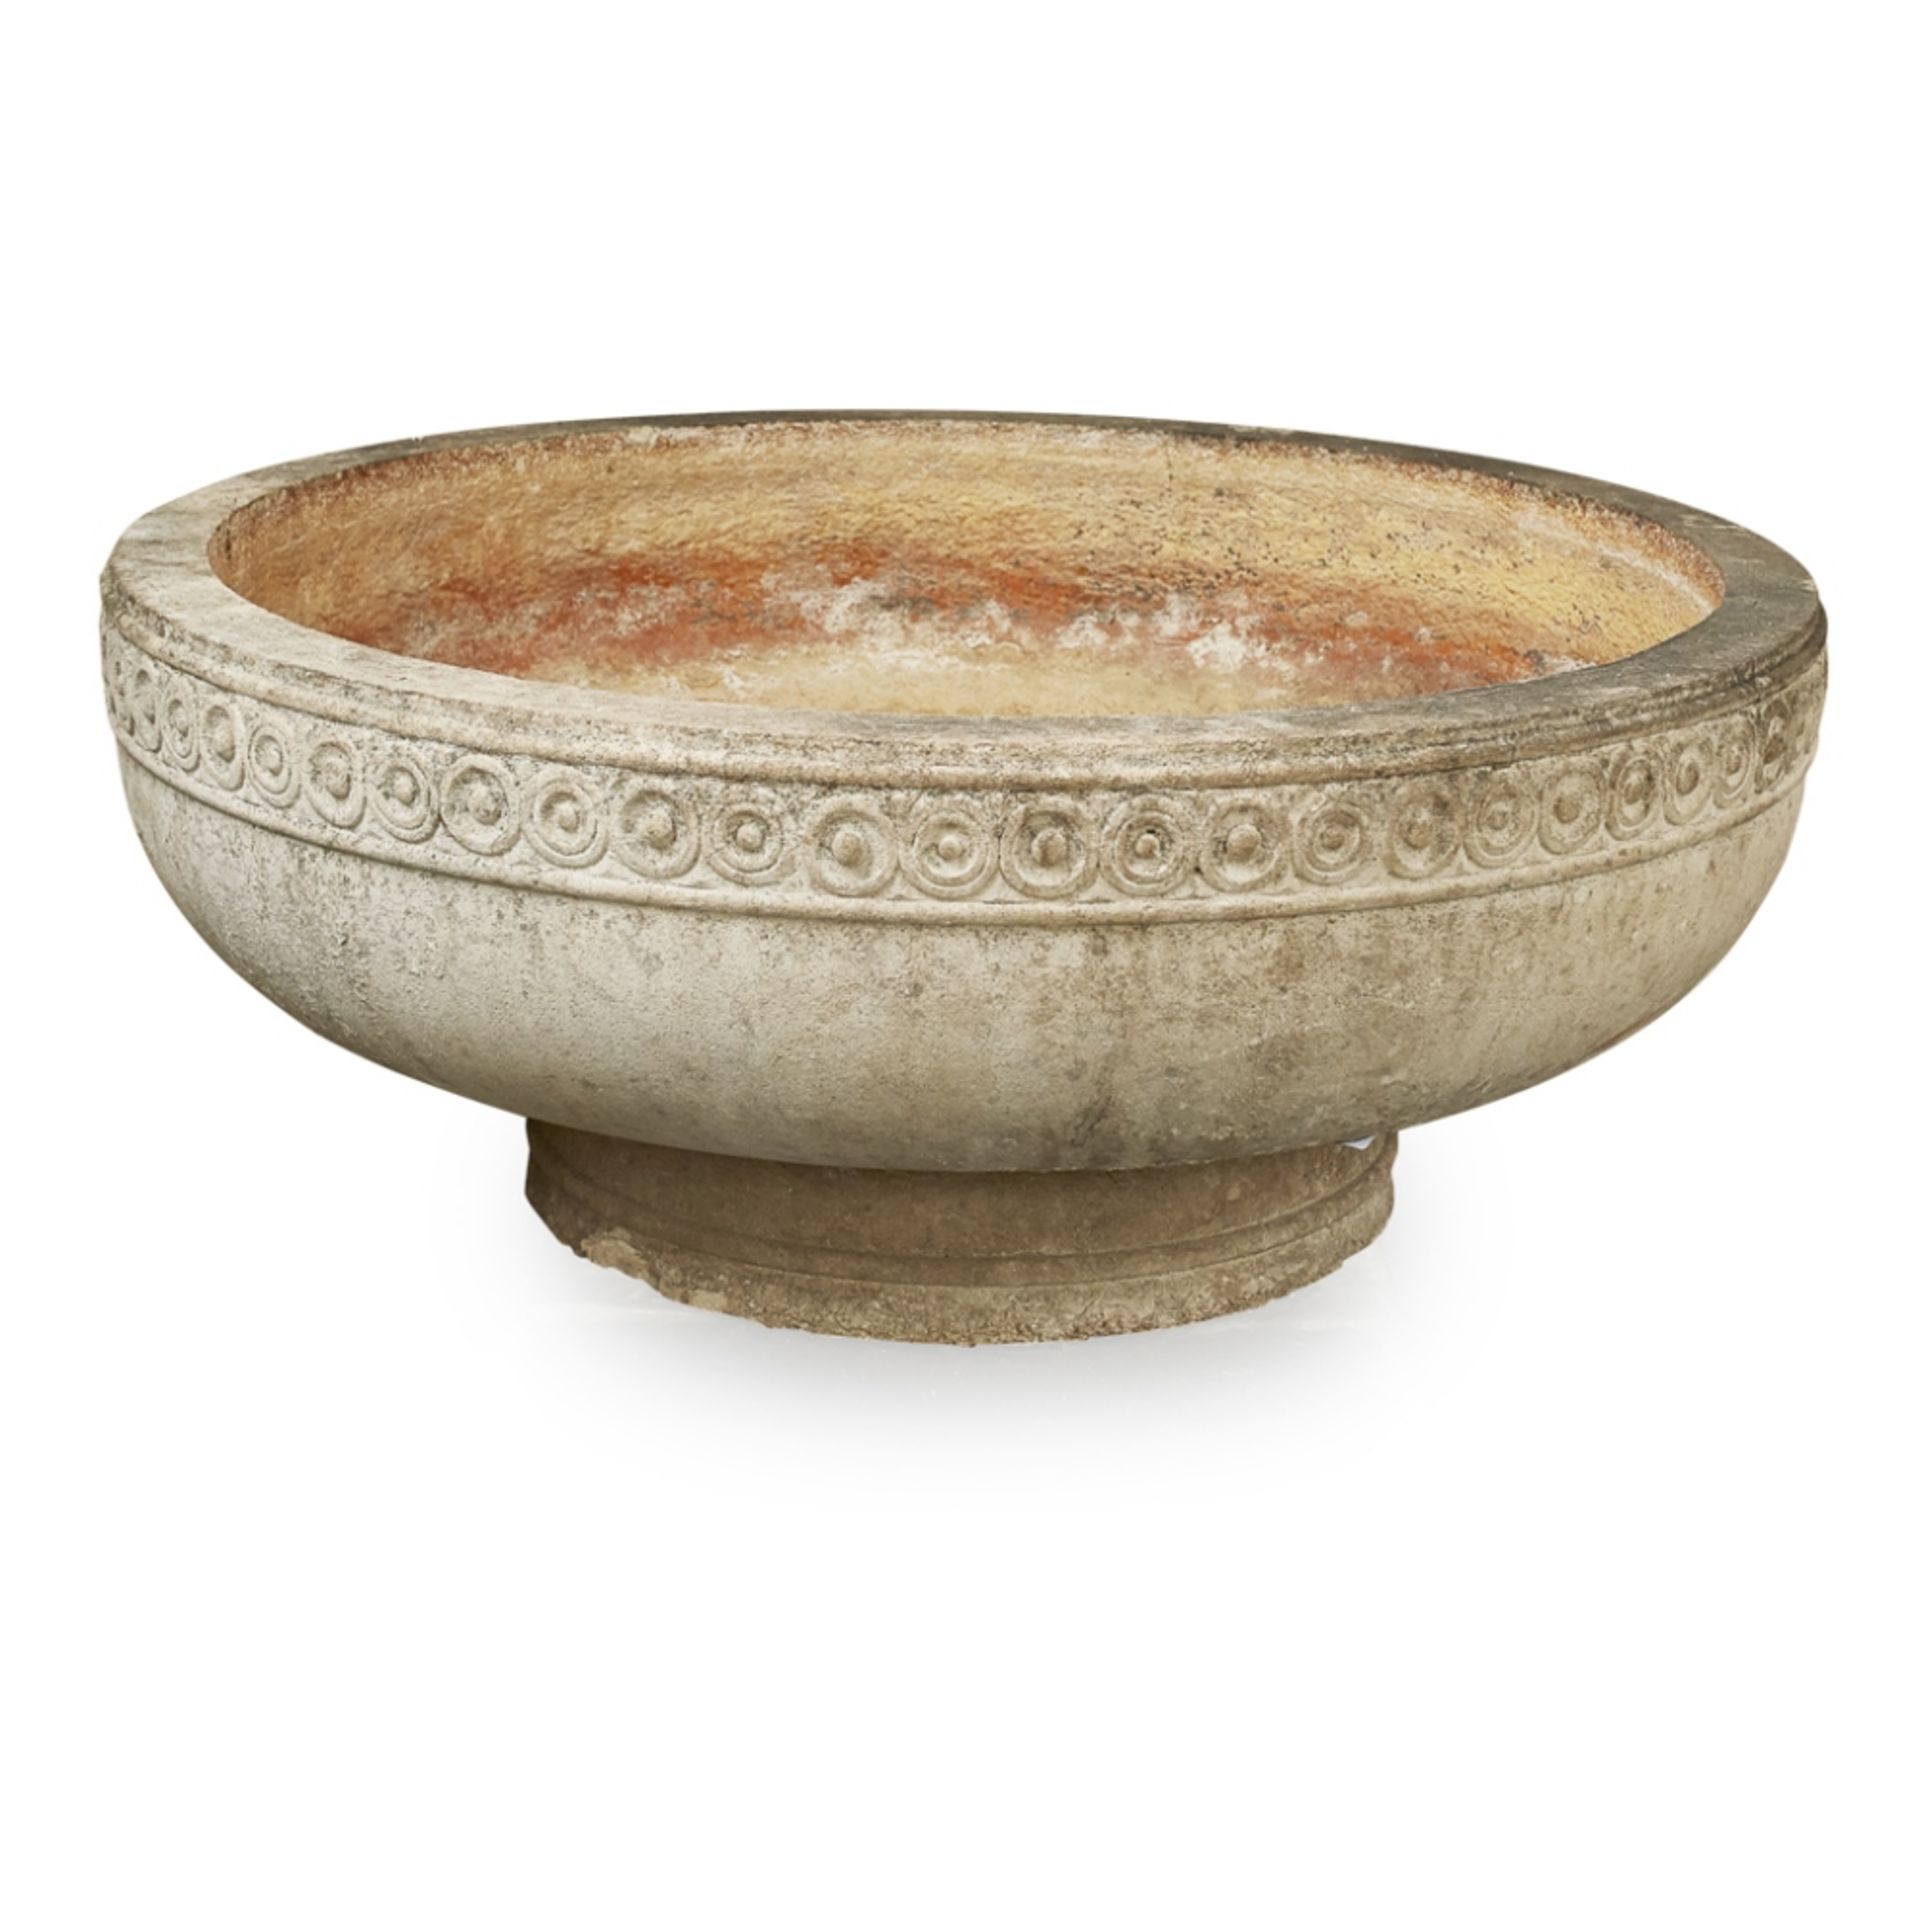 LARGE SHALLOW CIRCULAR STONEWARE BOWL EARLY 20TH CENTURY decorated with a moulded frieze of roundels